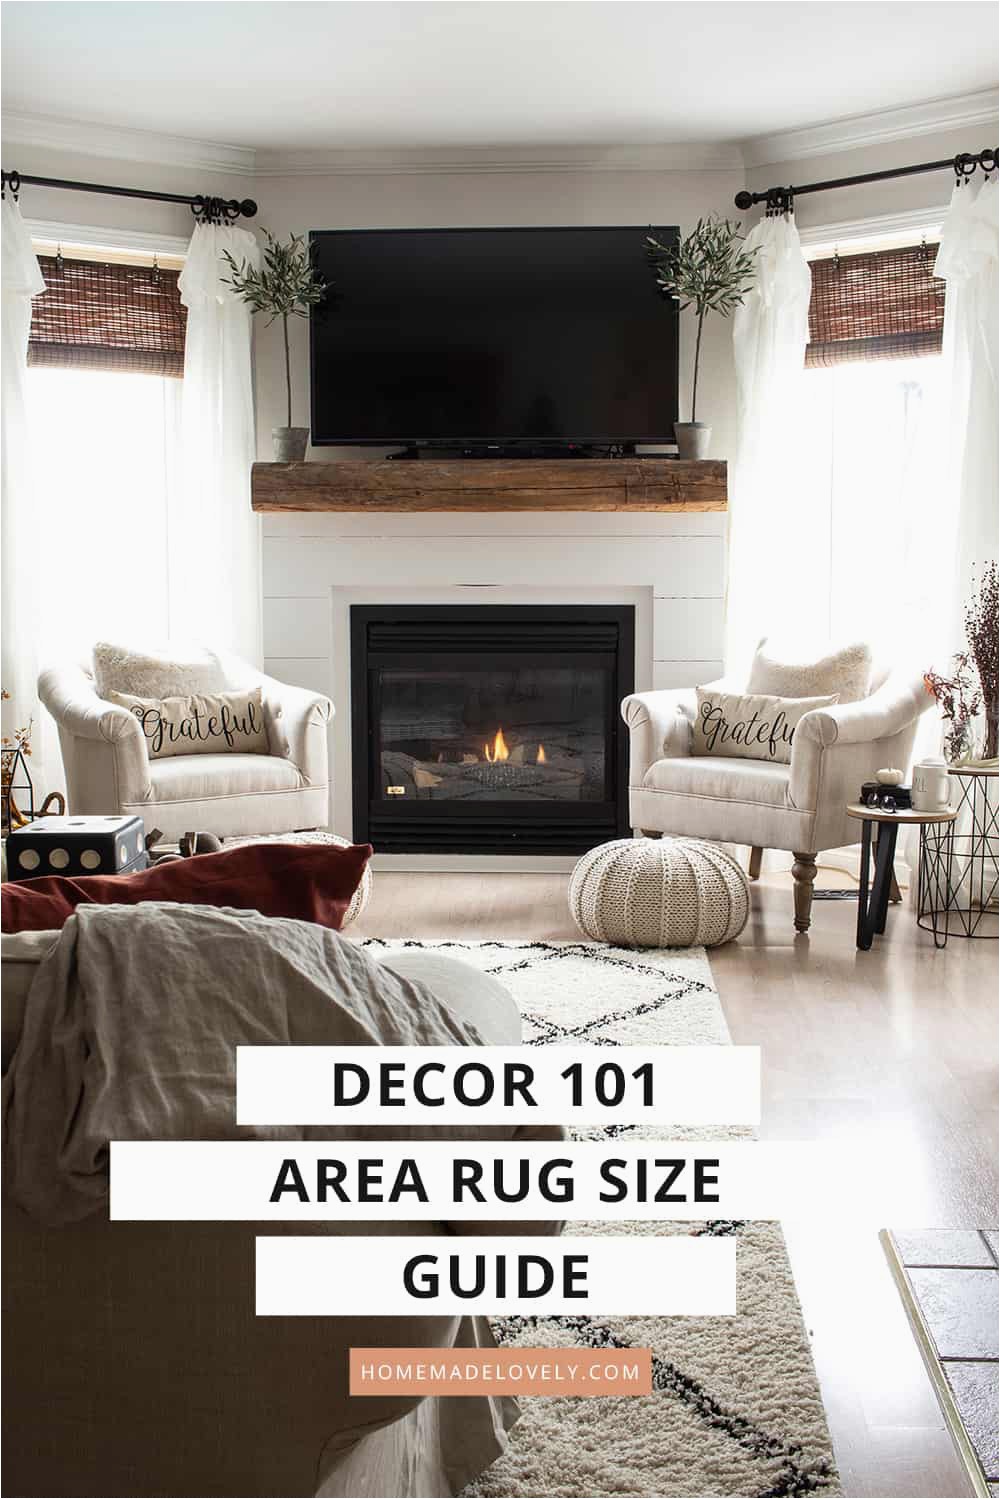 Area Rug In Front Of Fireplace area Rug Size Guide to Help You Select the Right Size area Rug